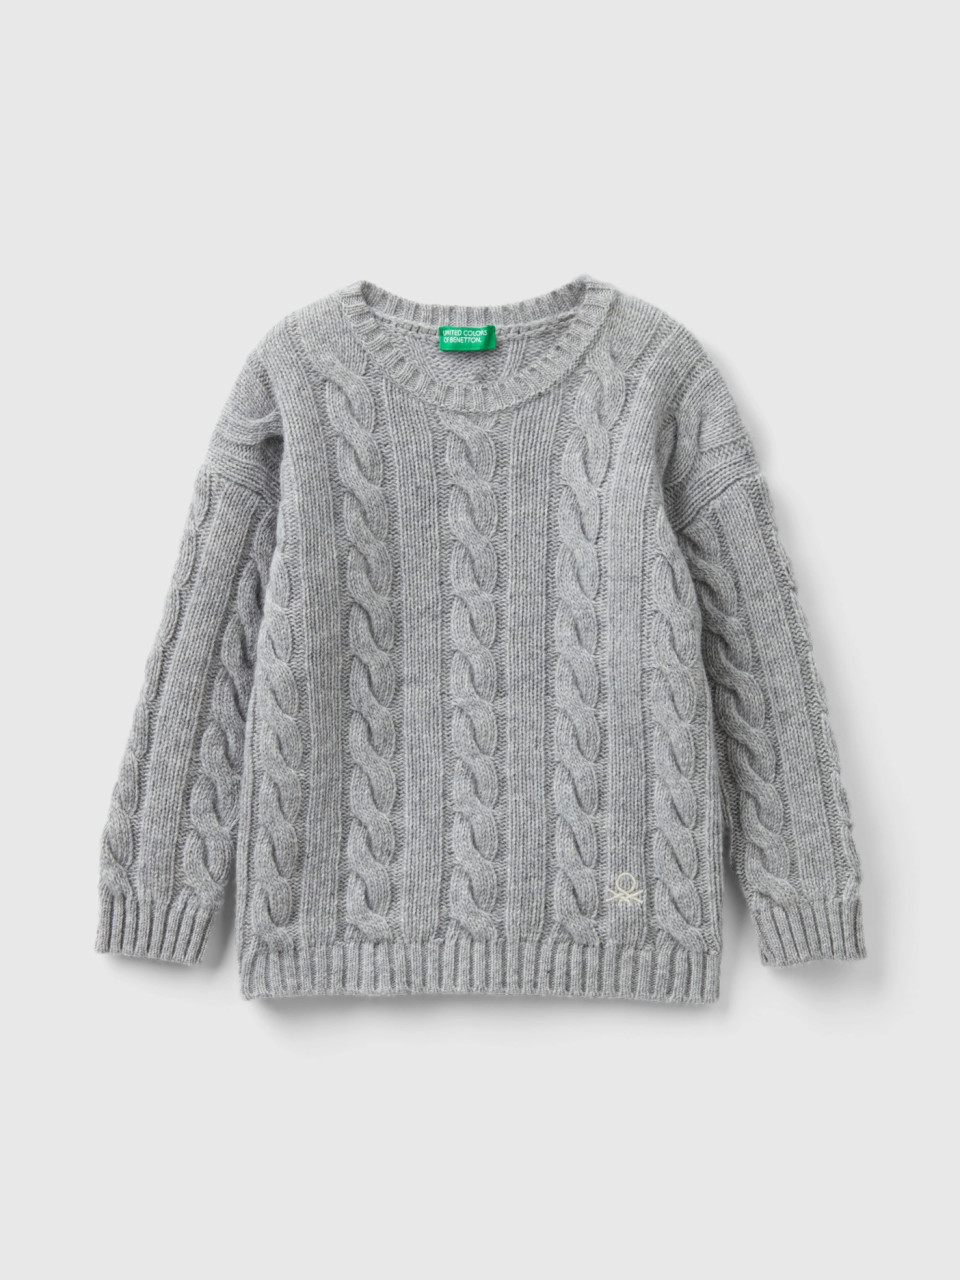 Benetton, Cable Knit Sweater In Wool Blend, Gray, Kids